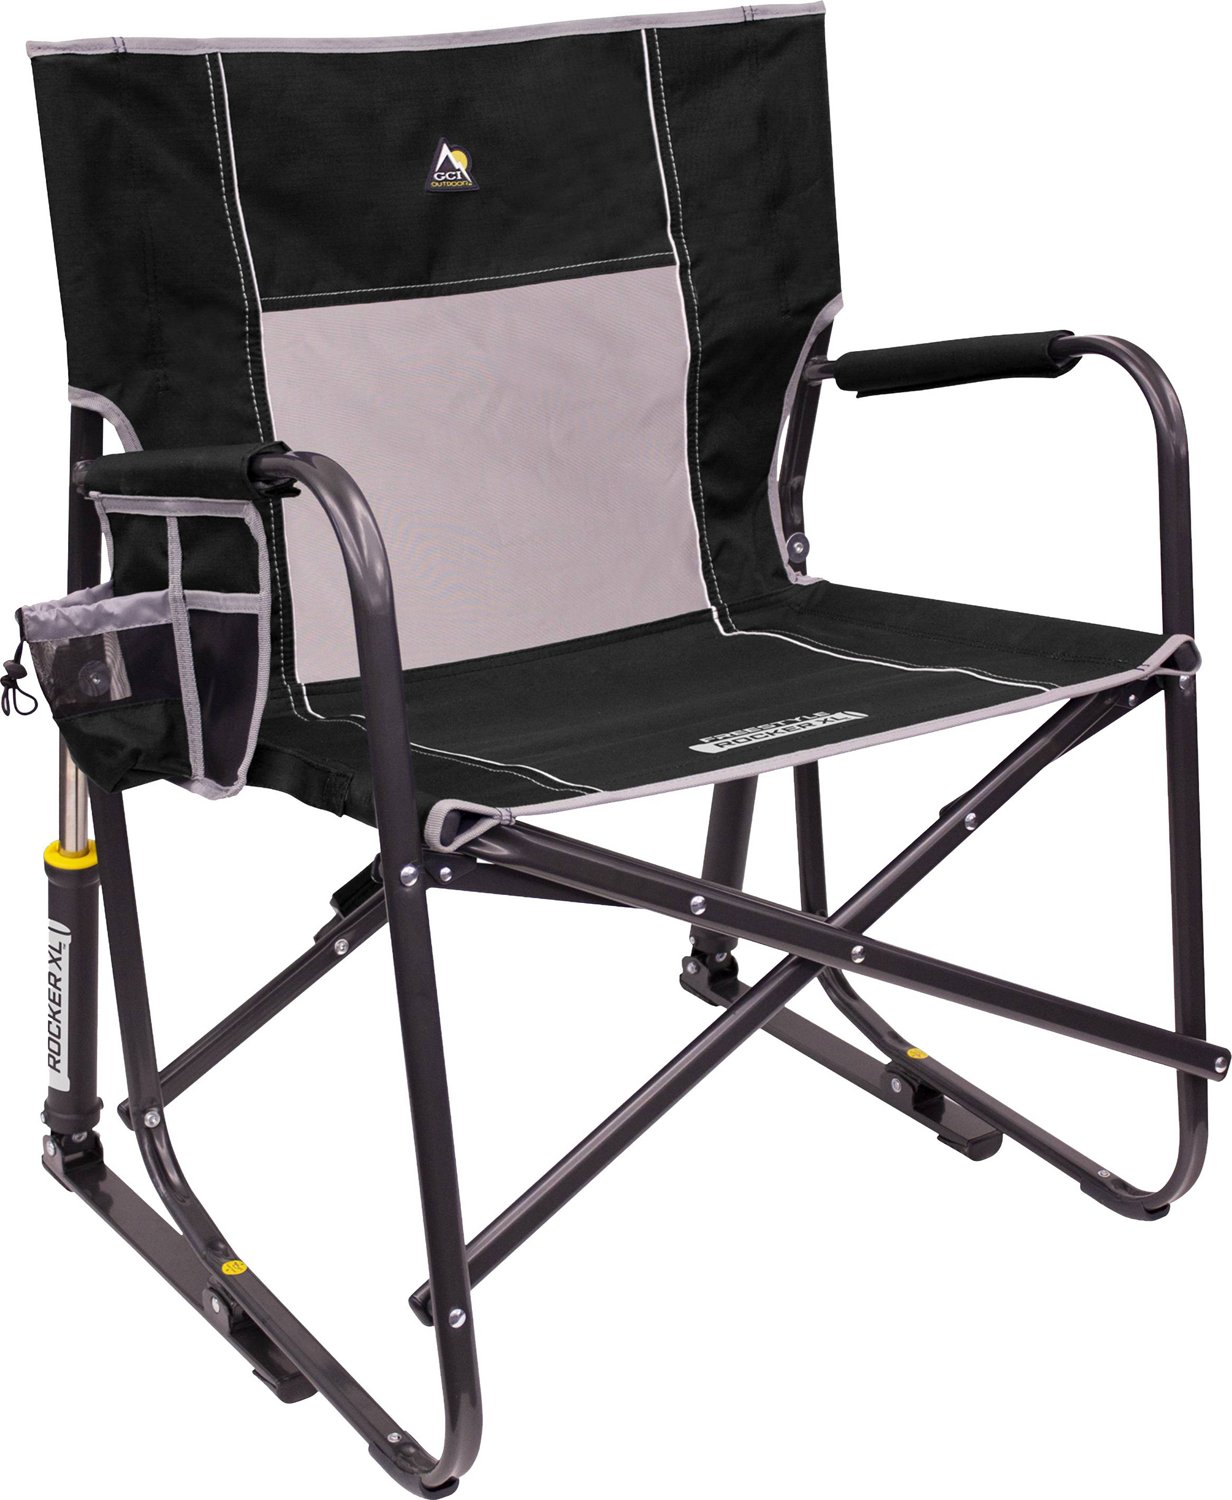 Camping Chairs for sale in Odom, Texas